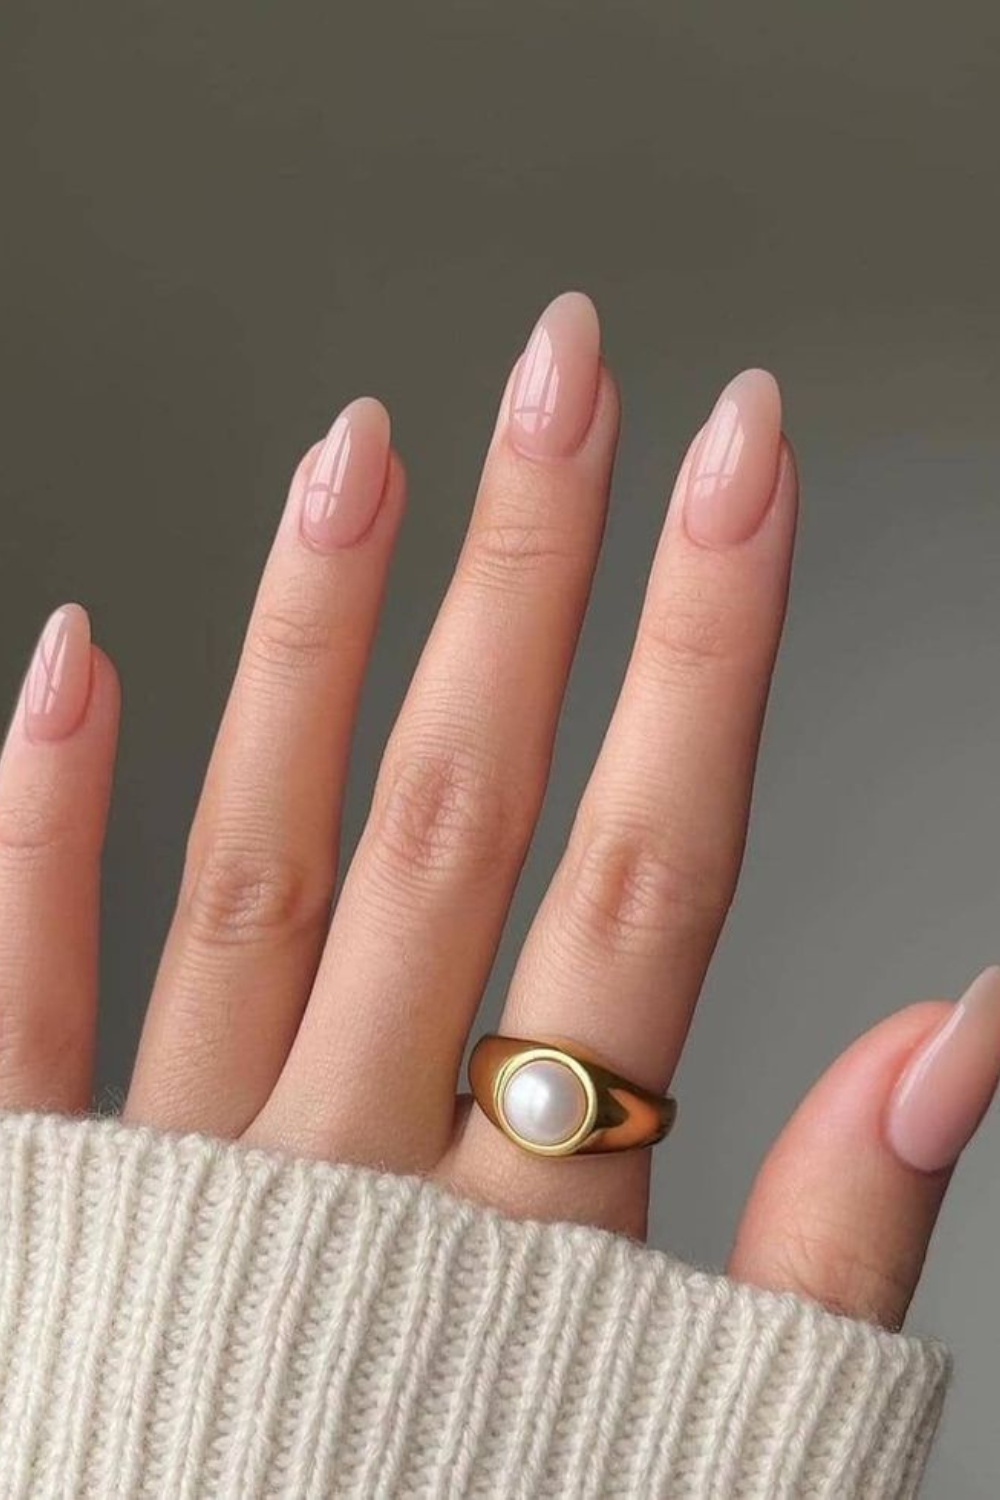 classy nude nails